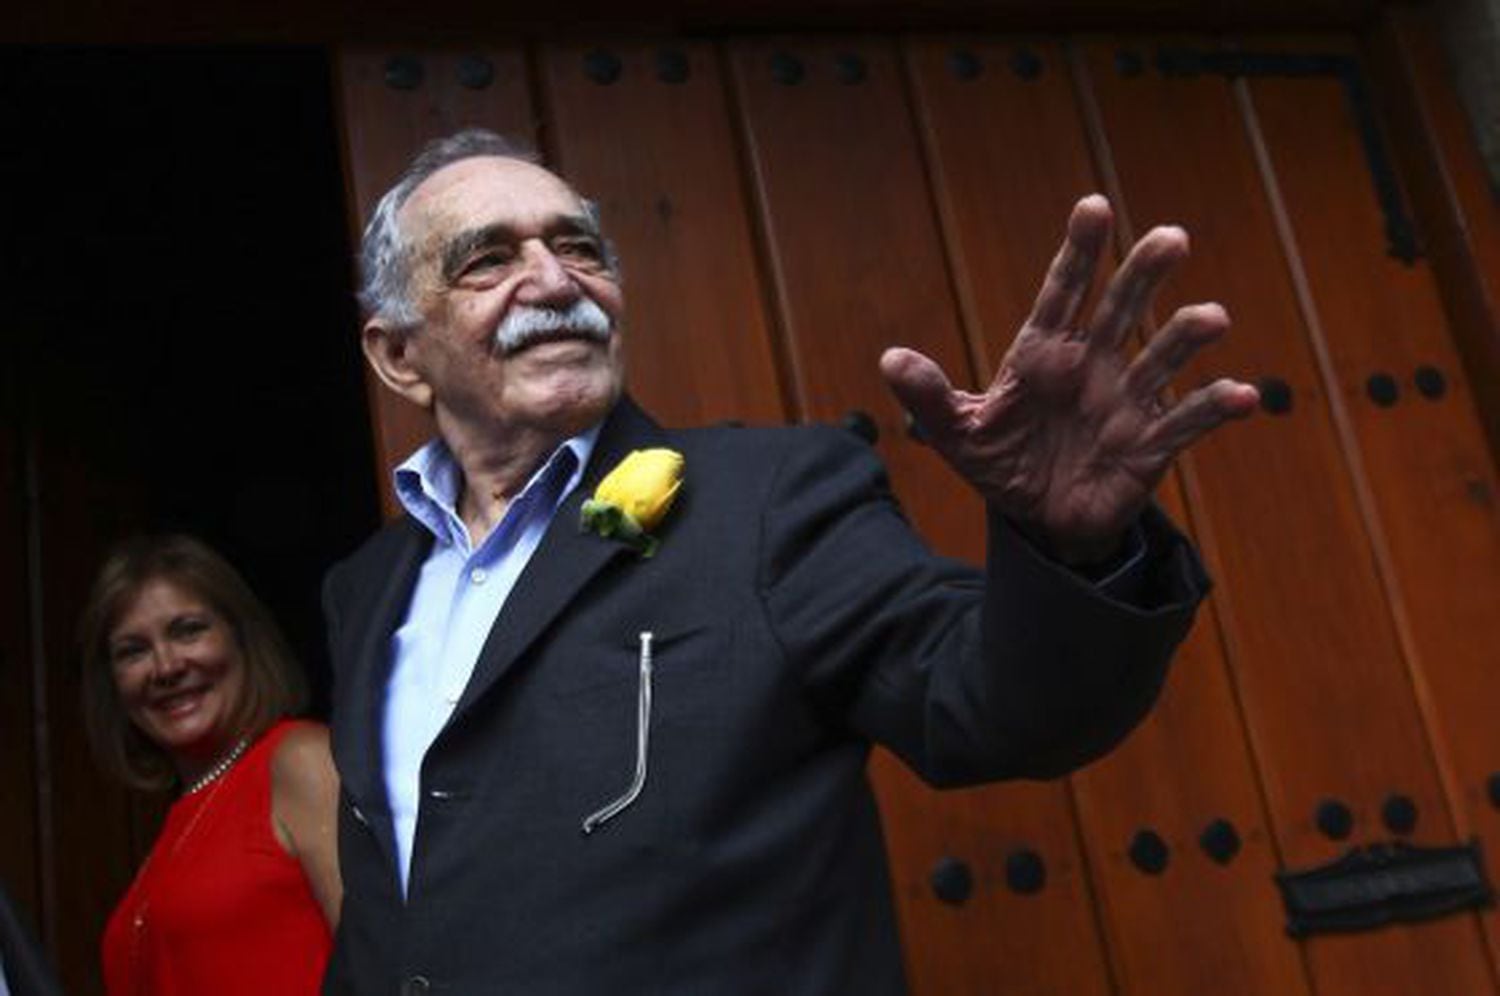 Gabriel García Márquez speaks to reporters outside his home in Mexico City on his birthday March 6, 2014.